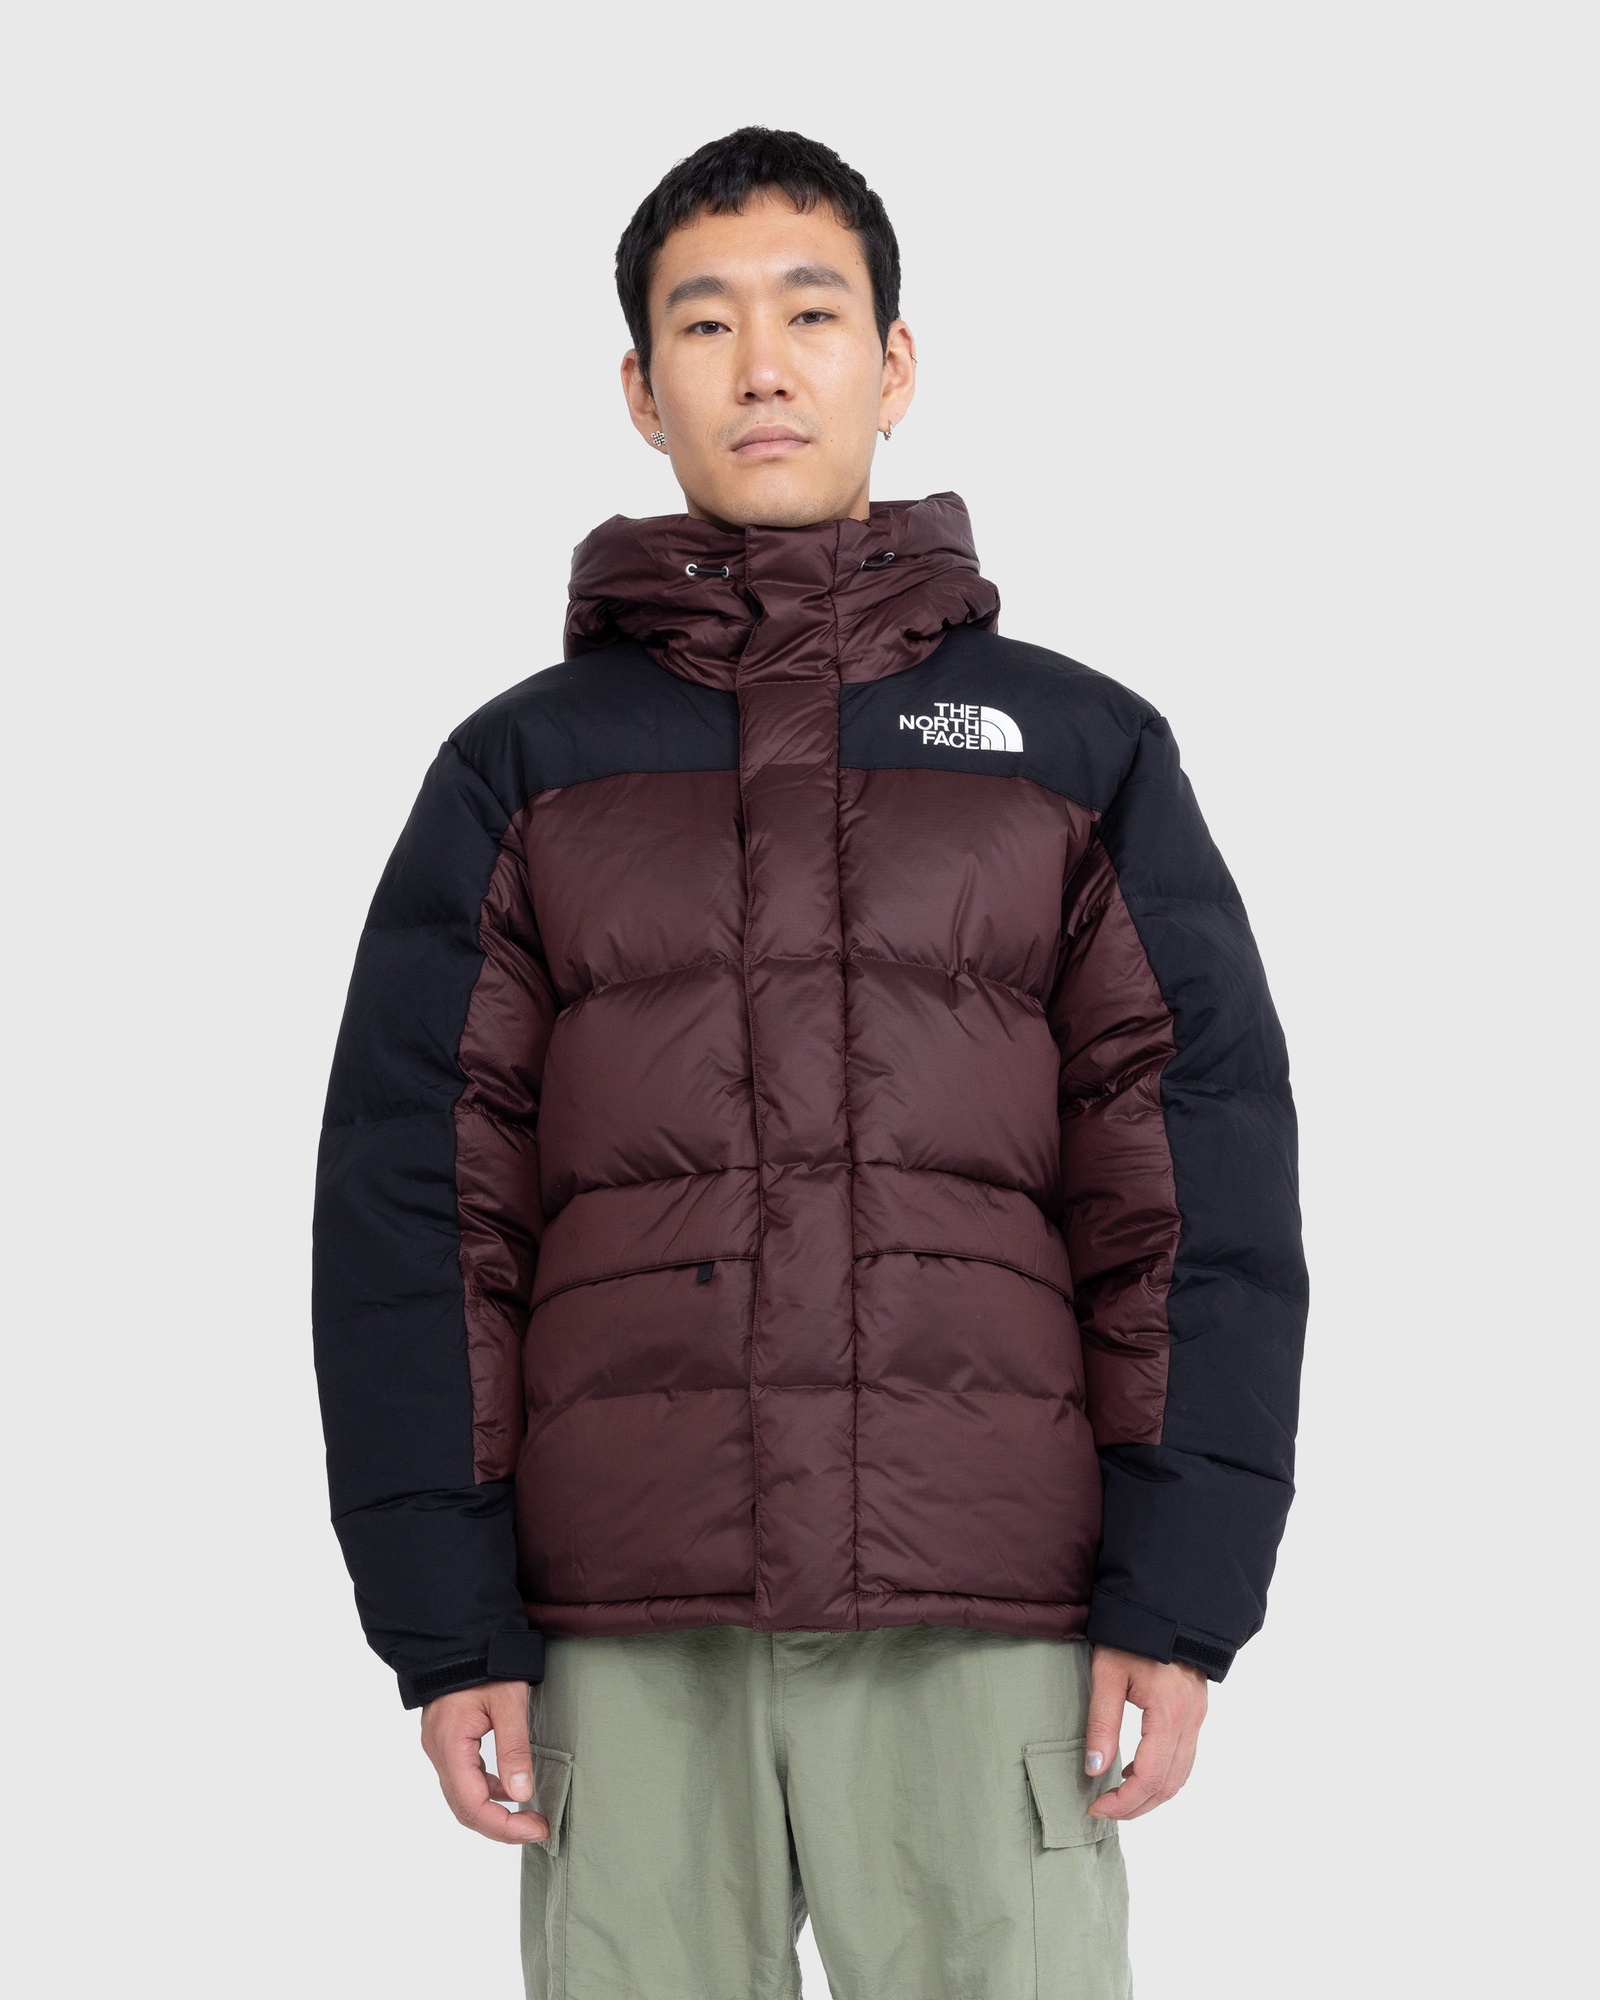 The North Face – Himalayan Down Parka Coal Brown | Highsnobiety Shop